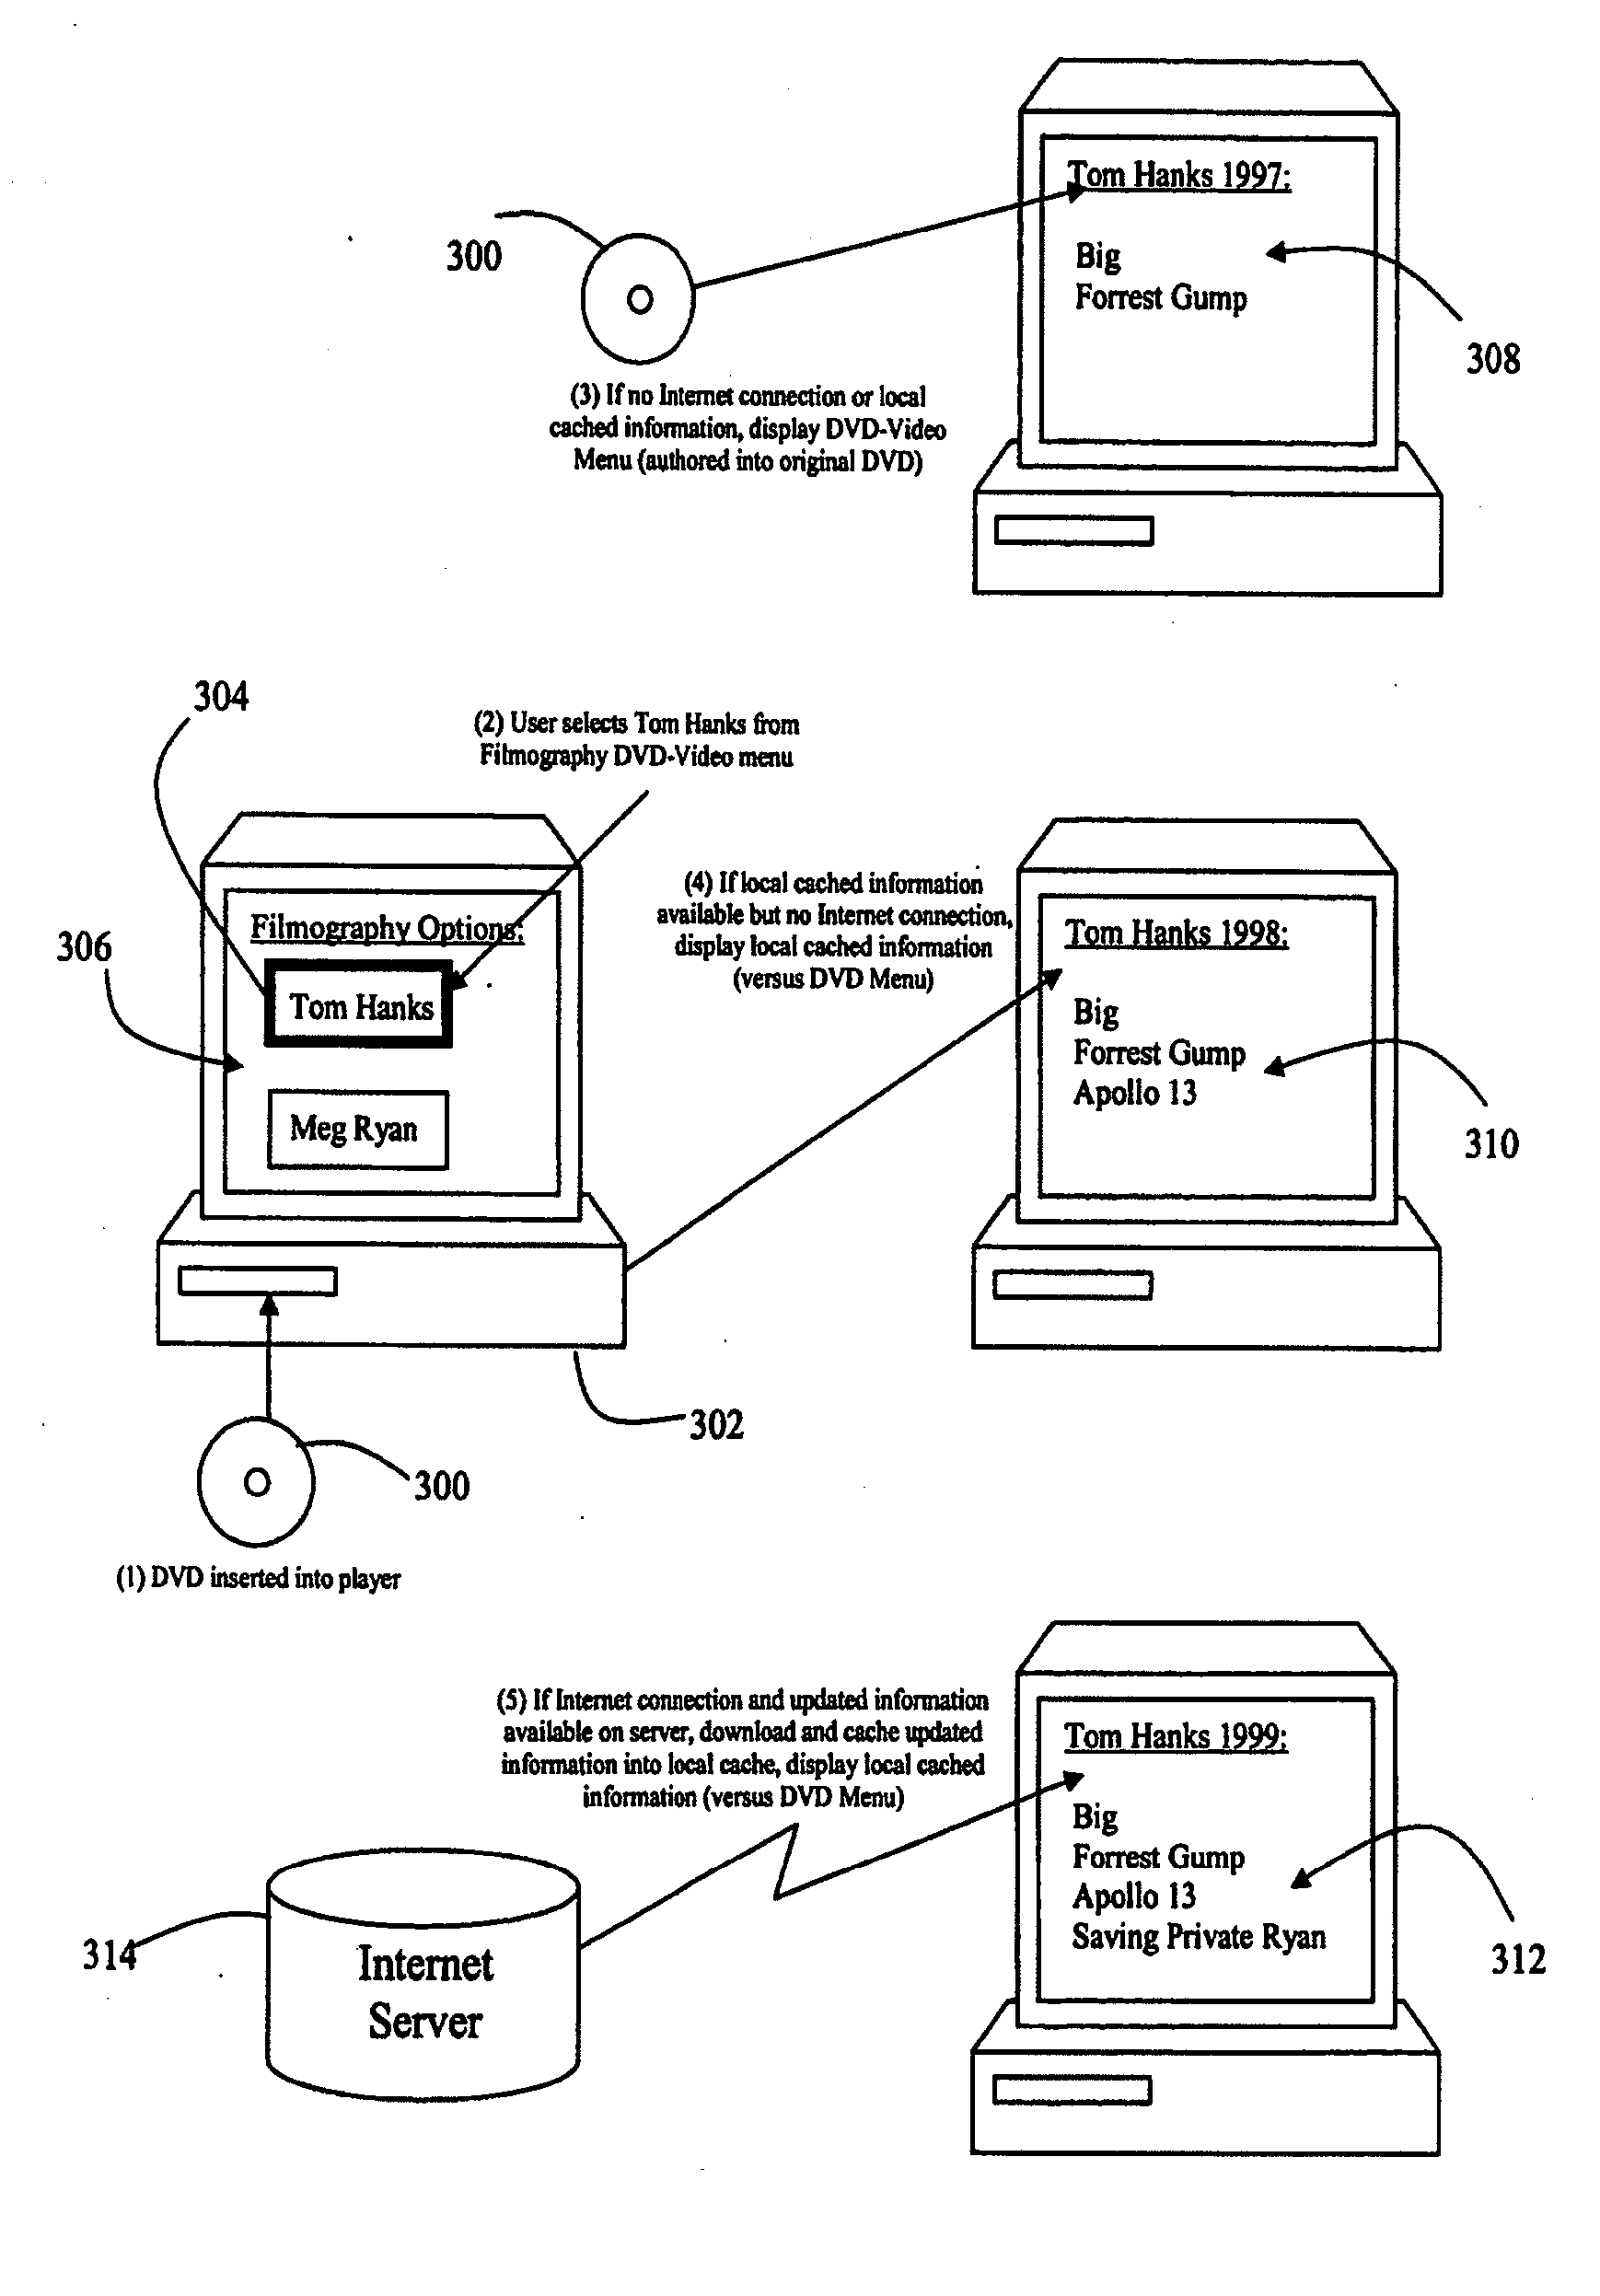 System, method and article of manufacture for updating content stored on a portable storage medium